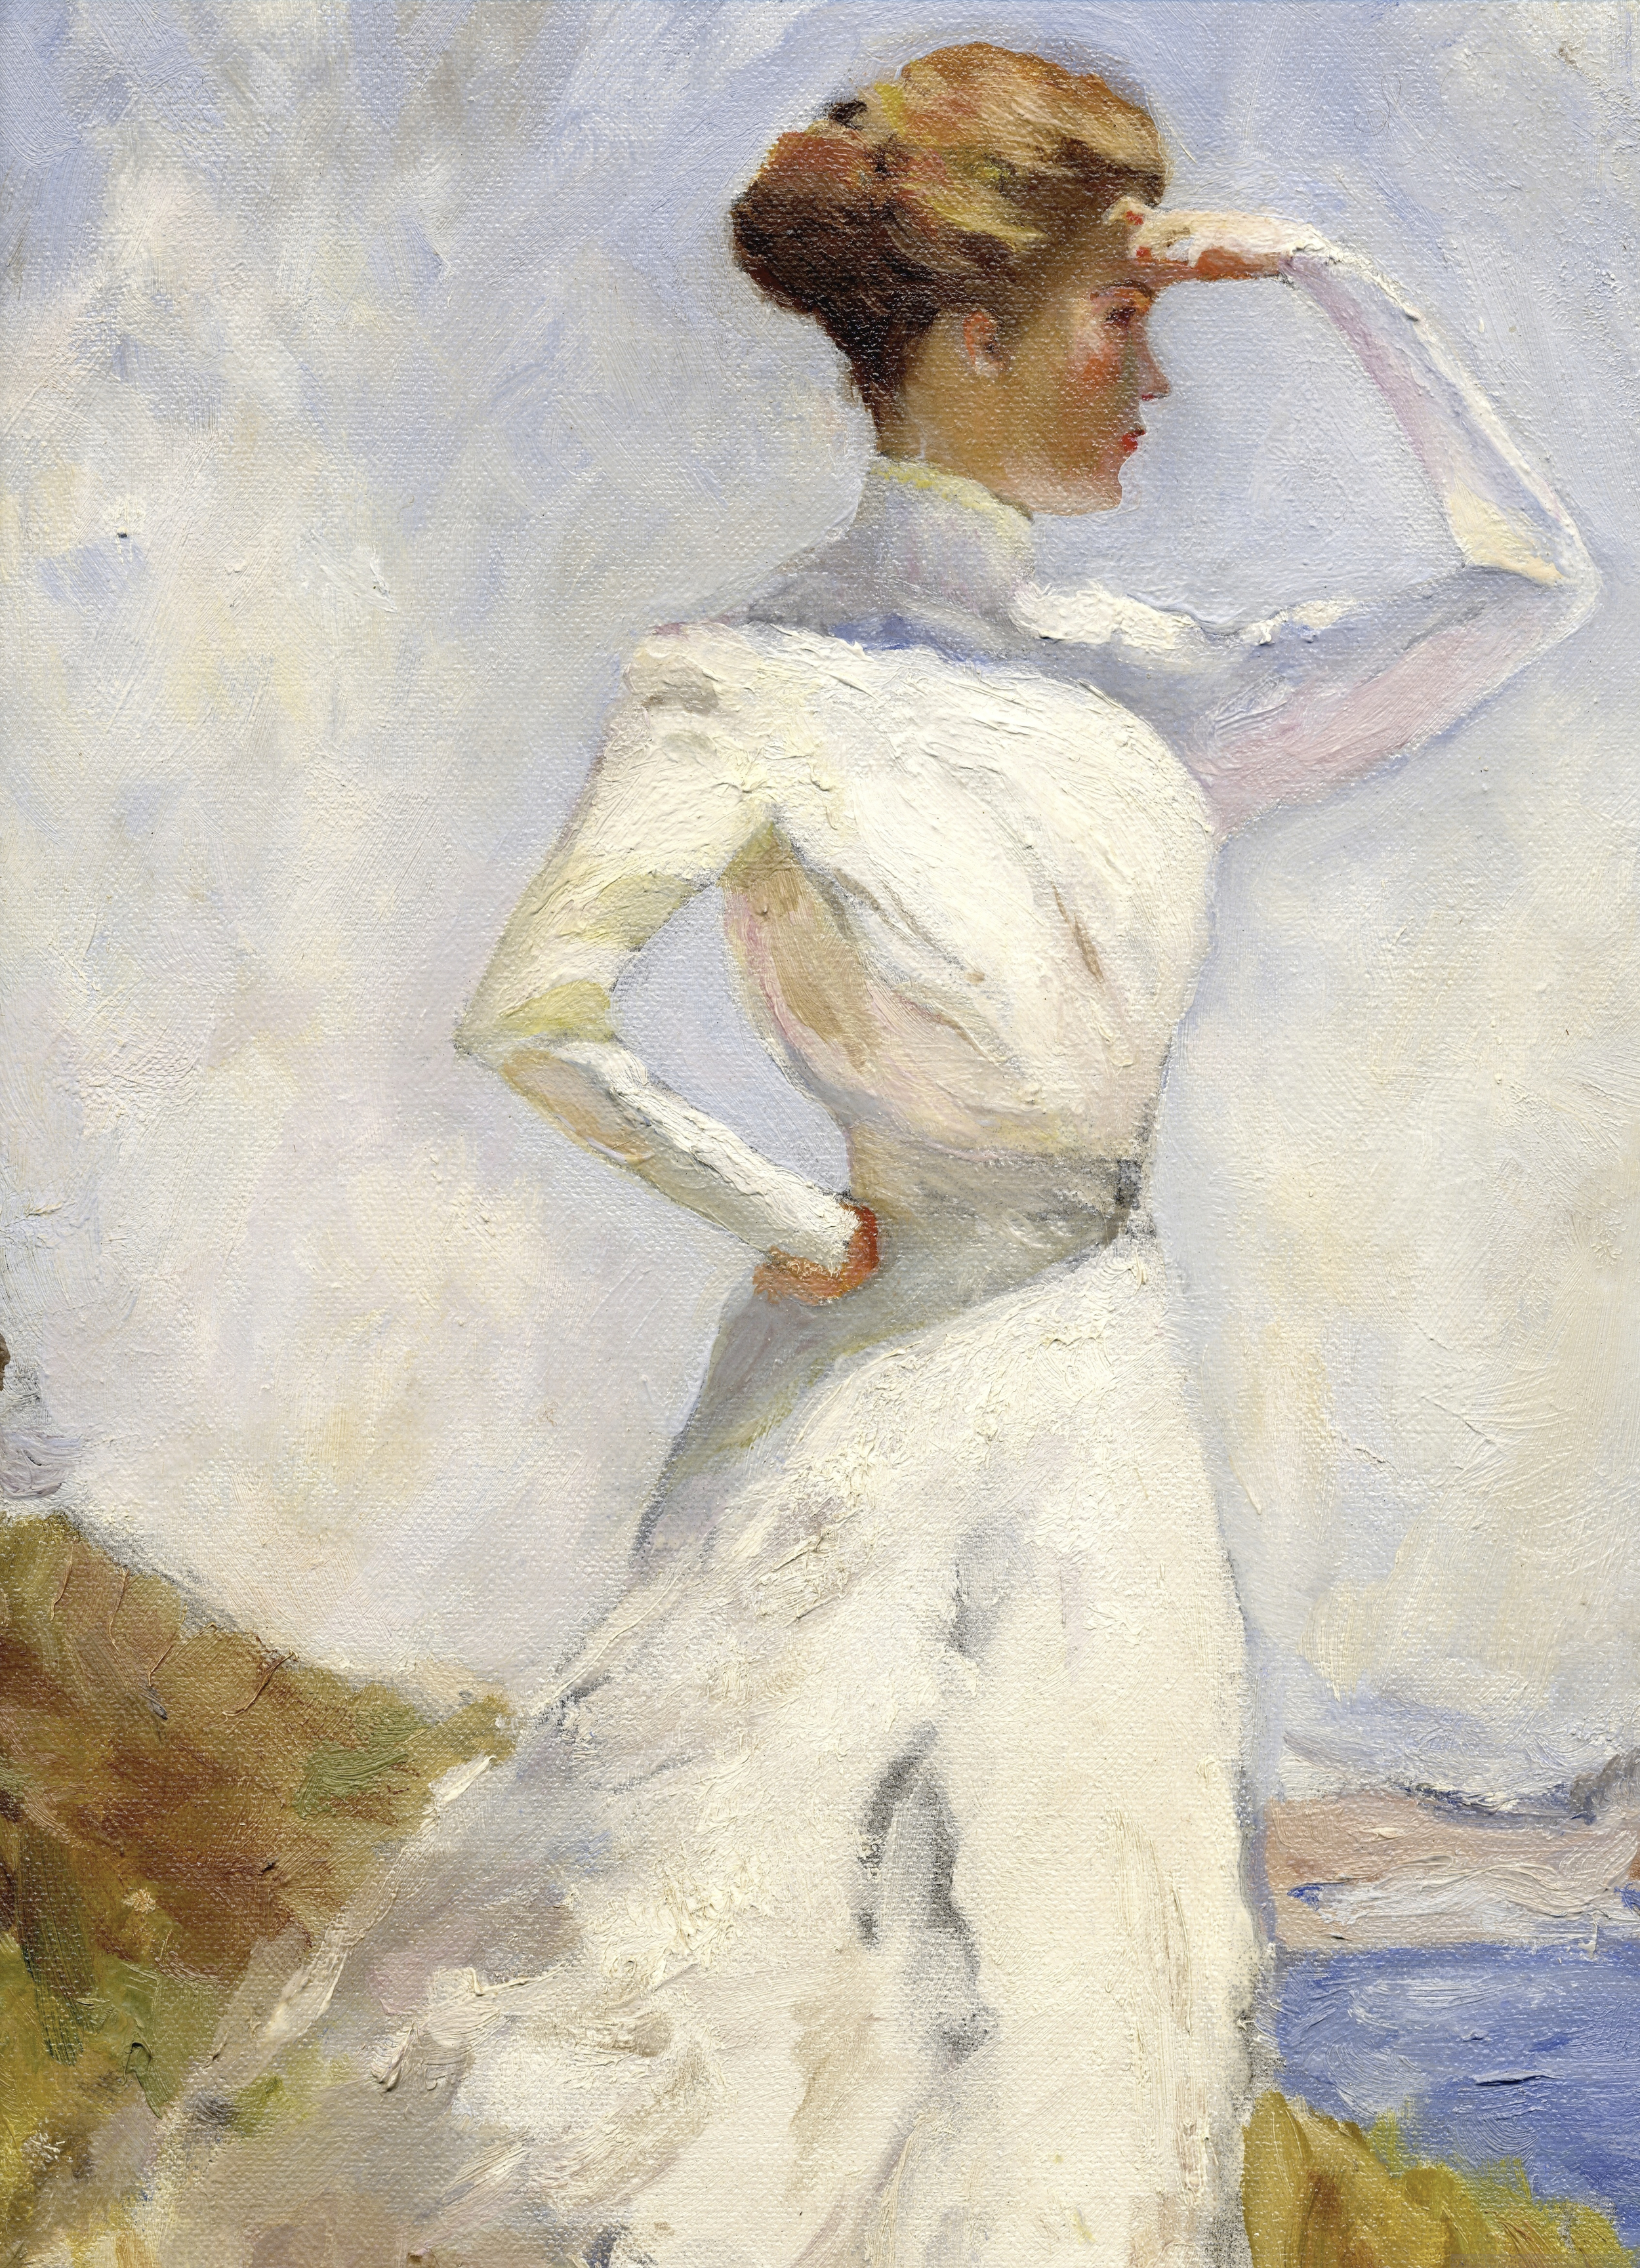 sunlight (or eleanor) study by George Porter after Frank W Benson